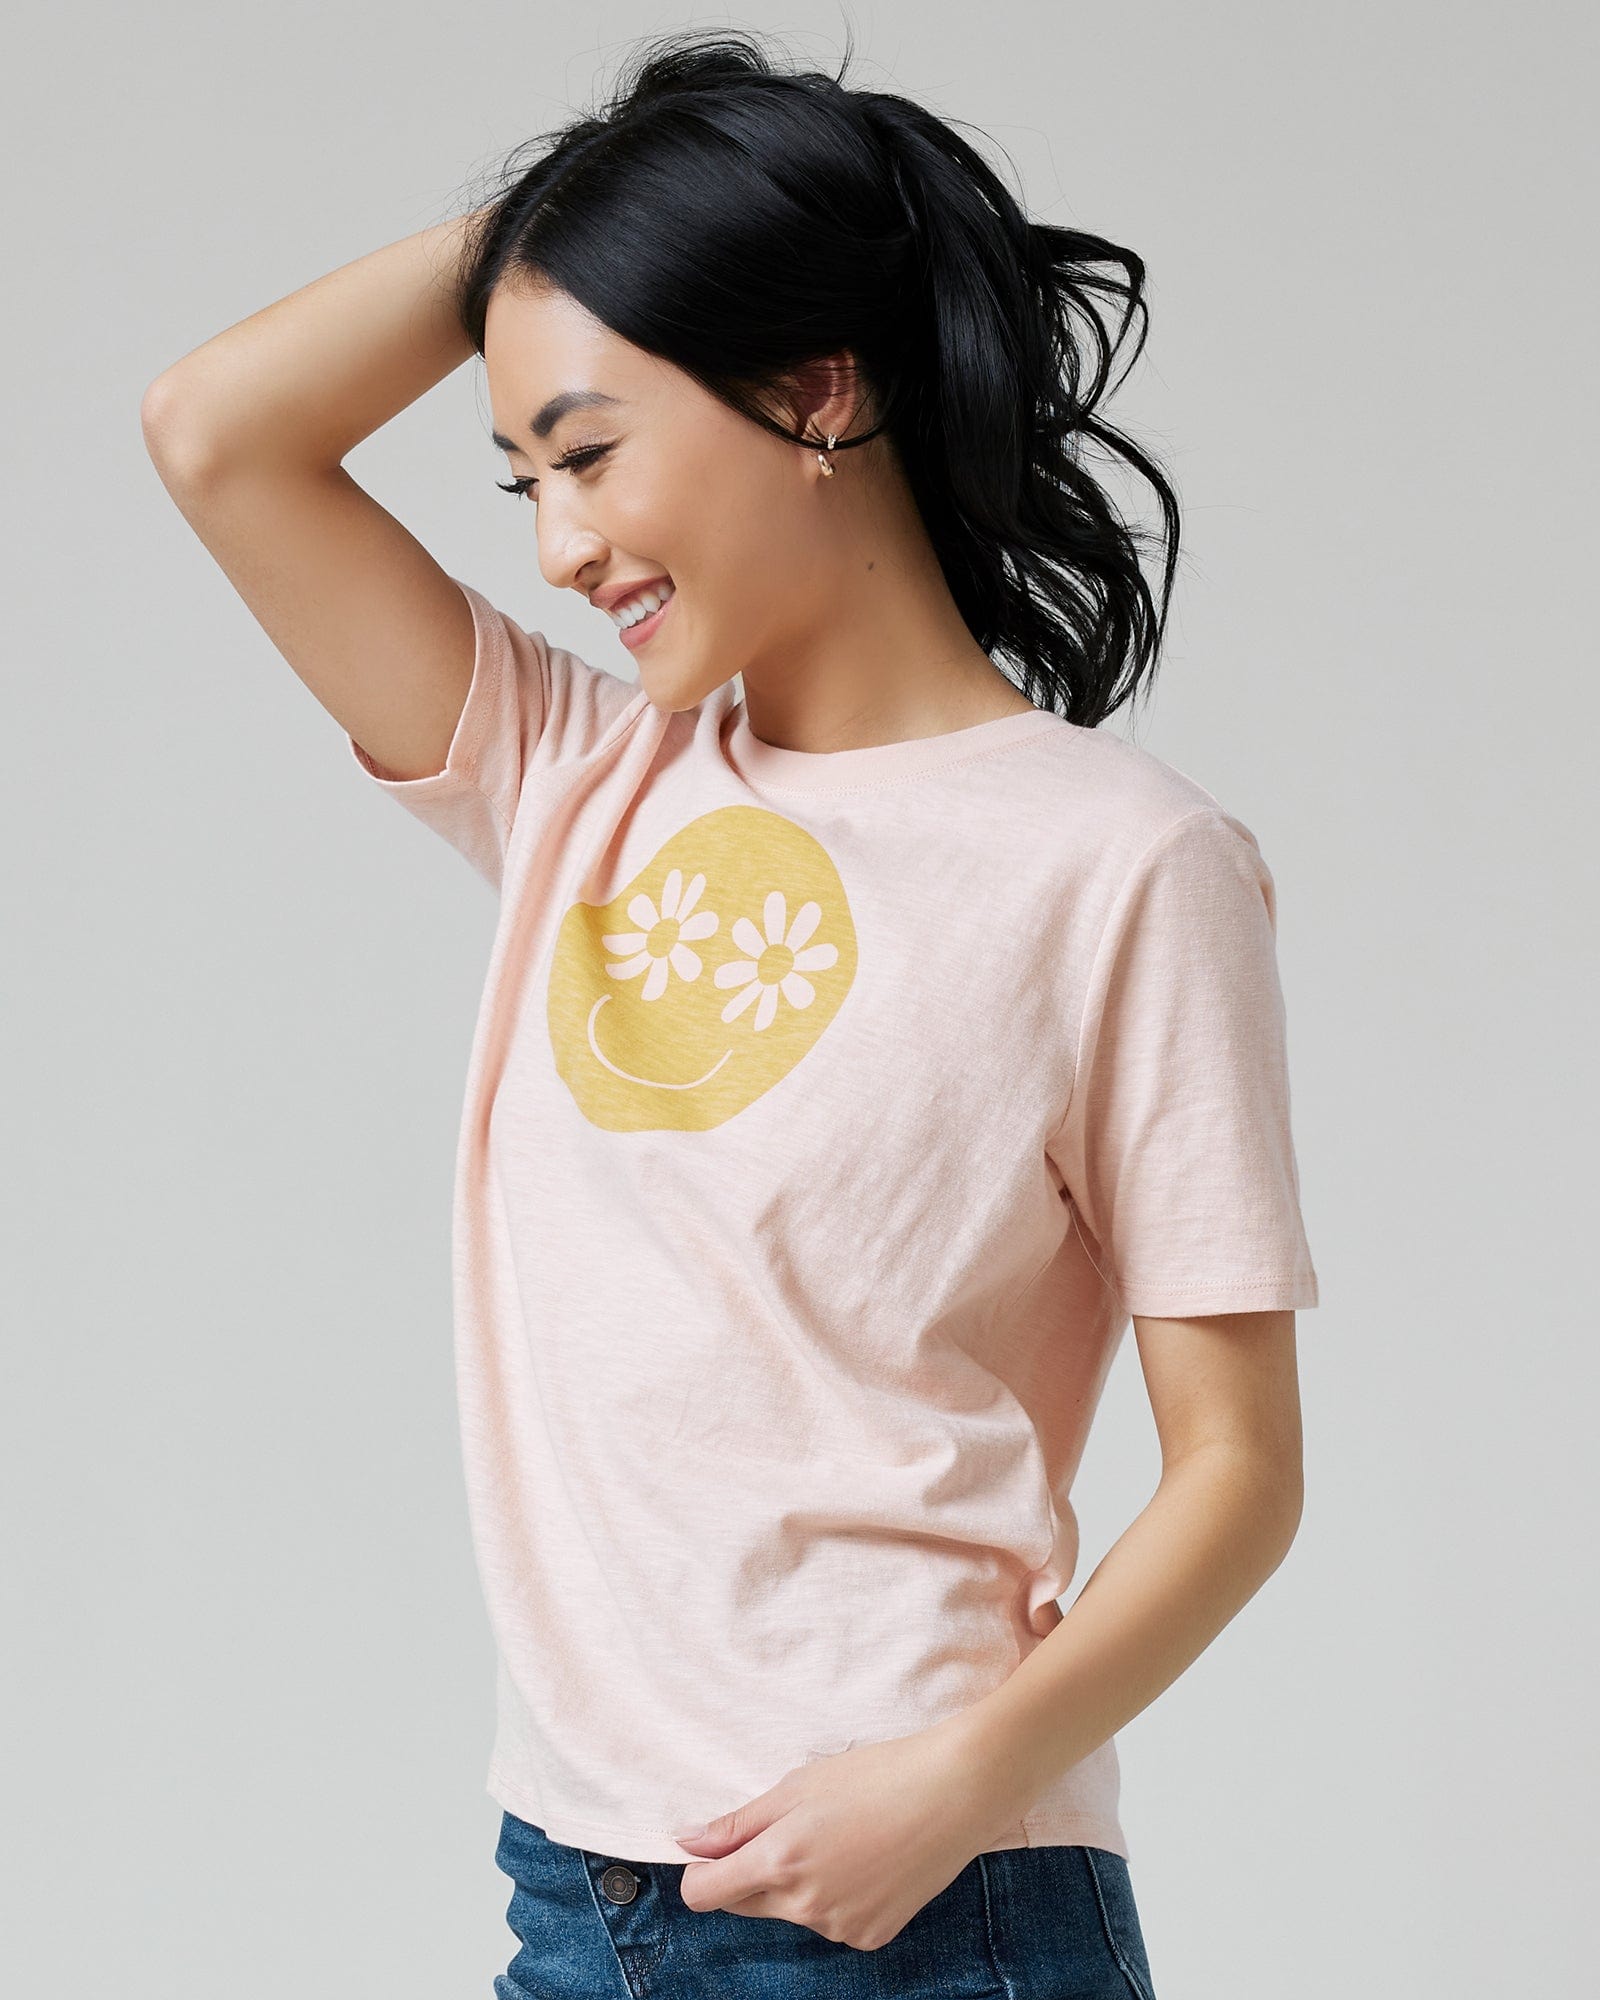 Woman in a pink graphic tee with a smiley face on front